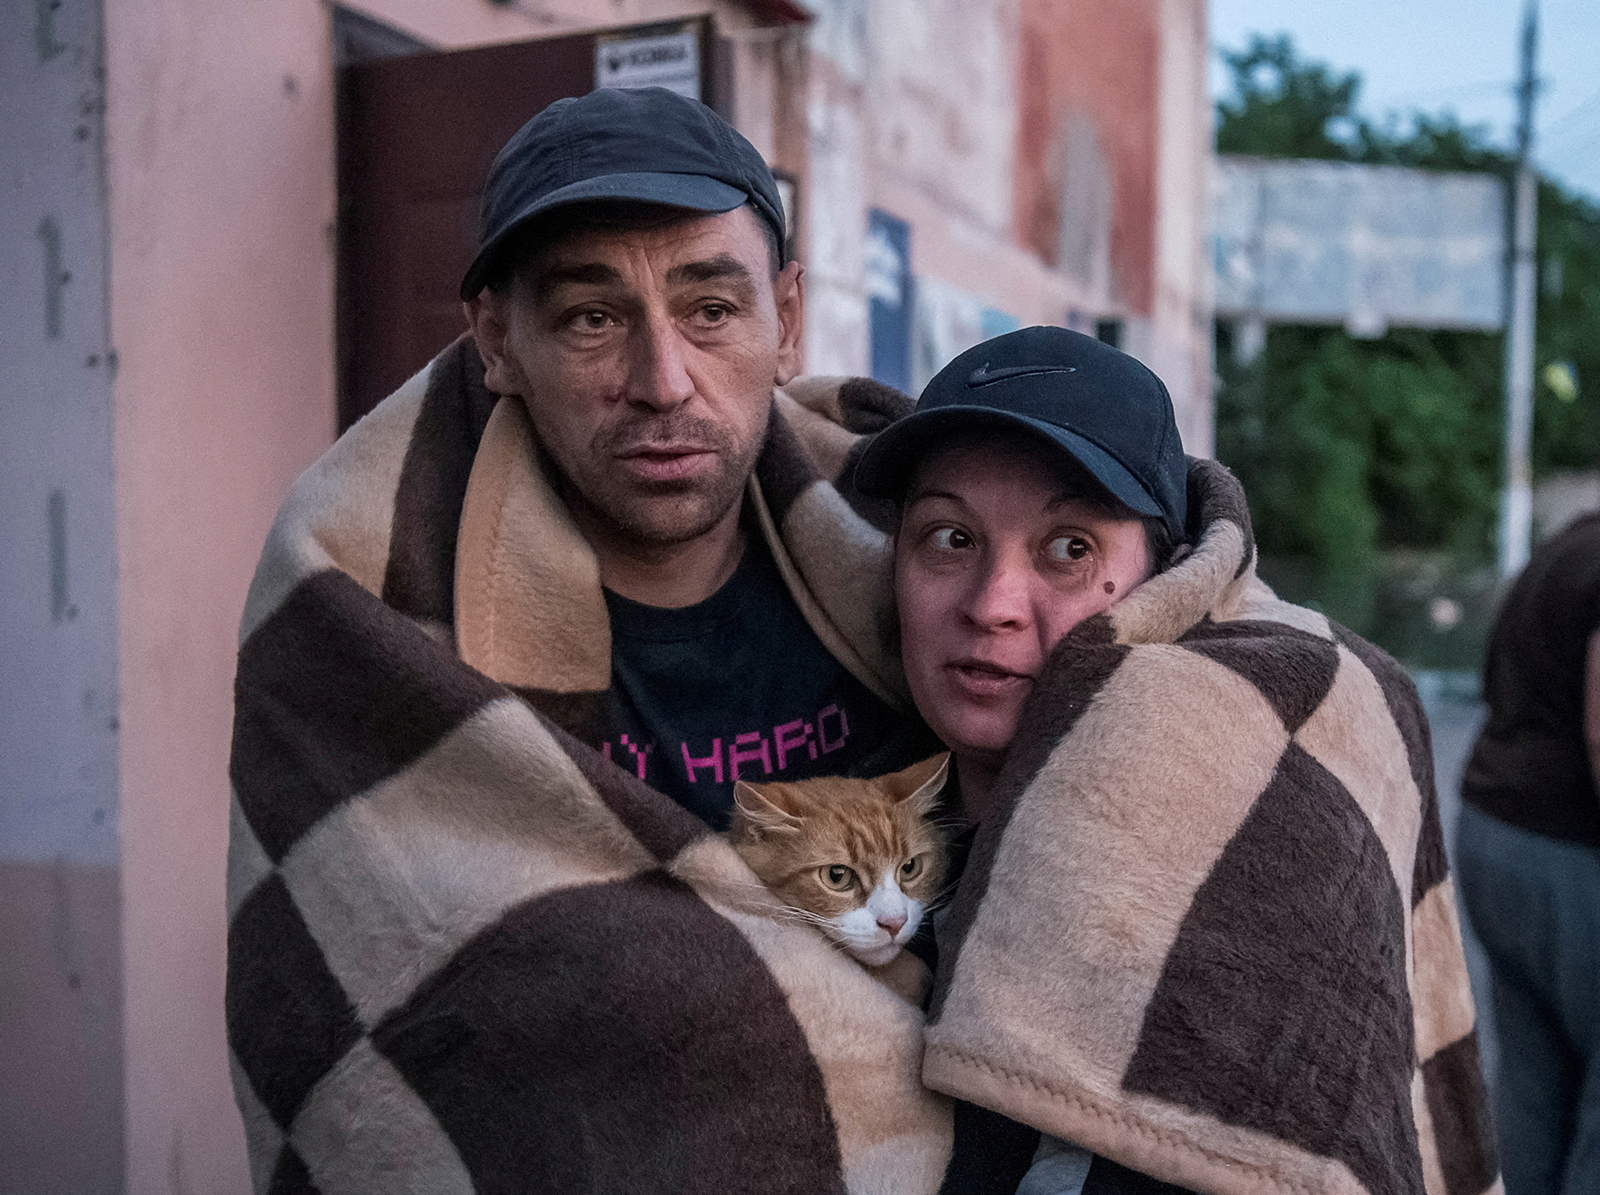 Local residents react after evacuating from a flooded area in Kherson, Ukraine on June 6.